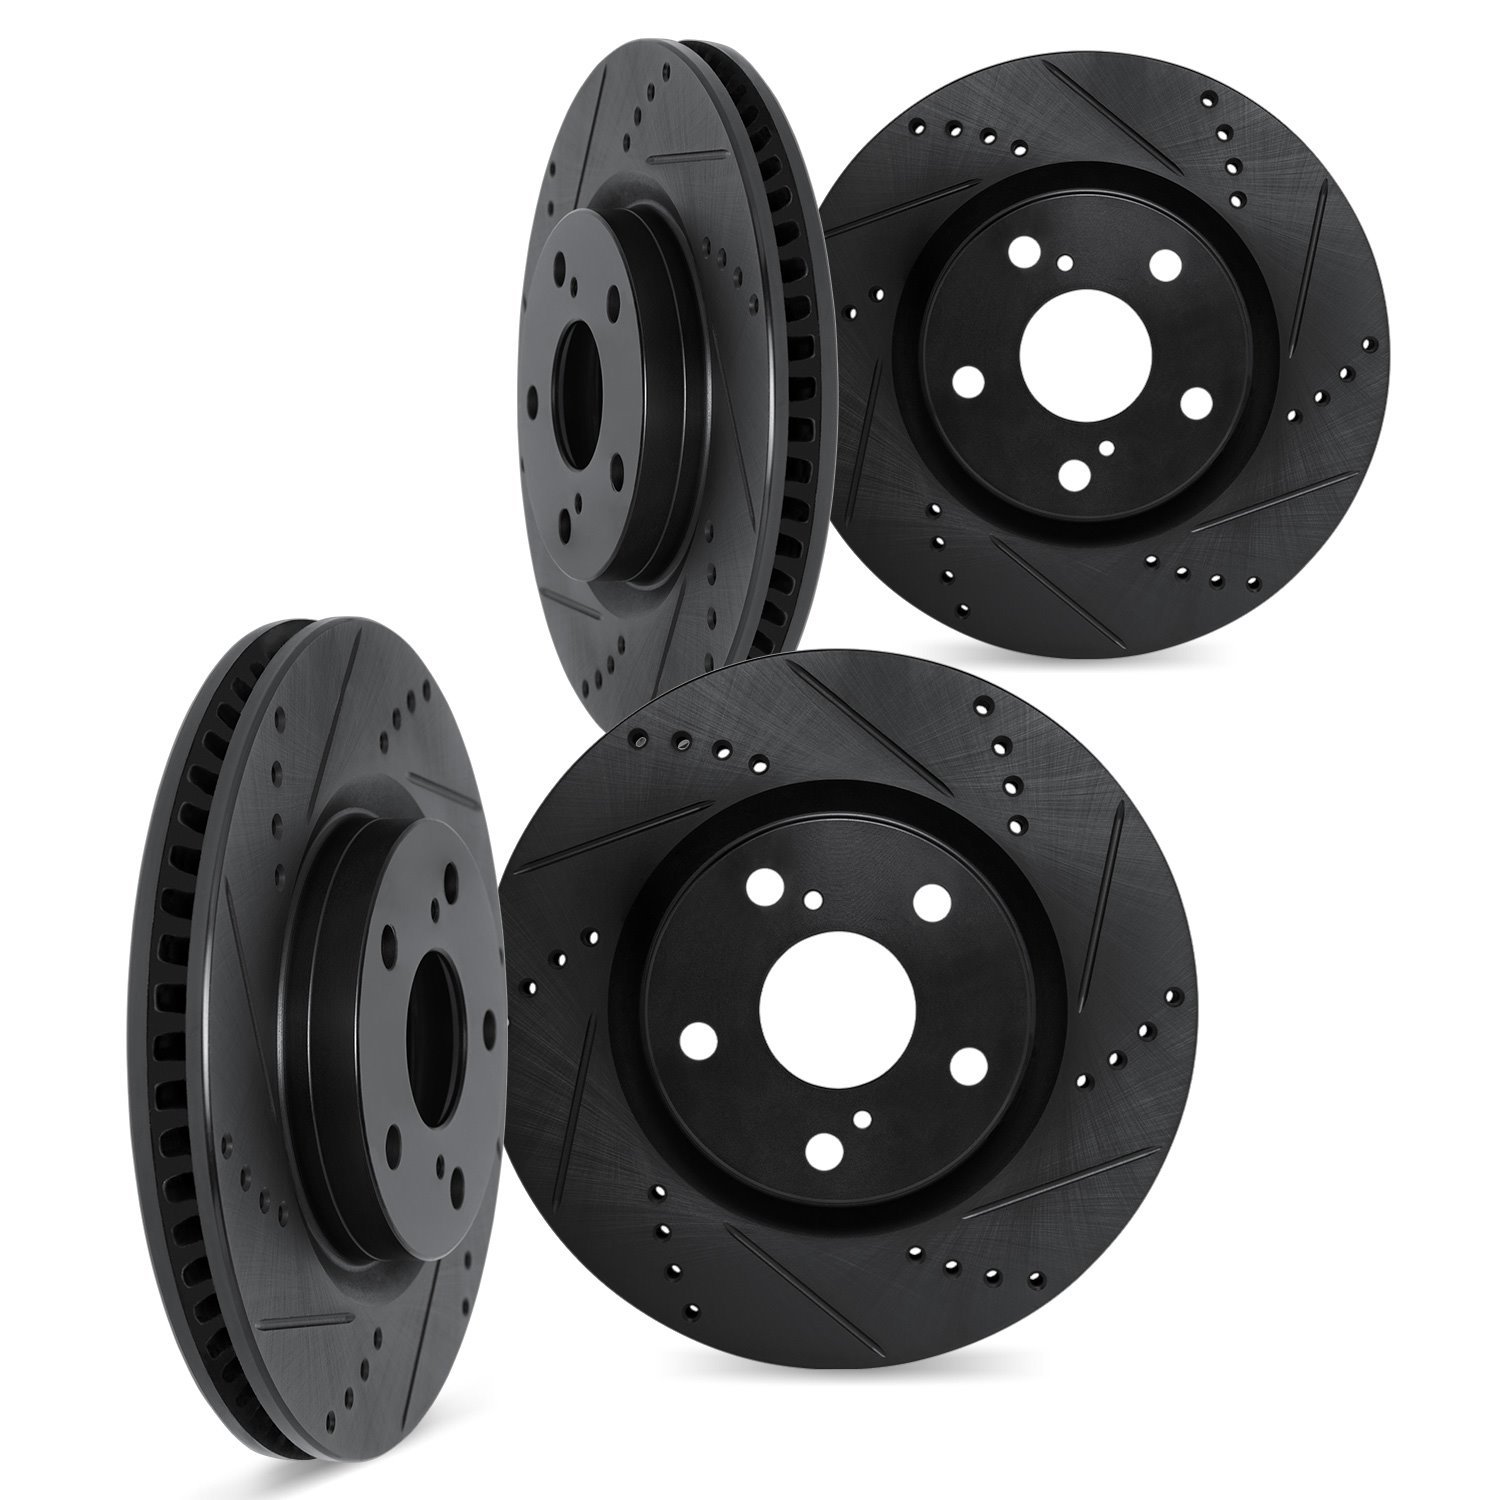 Drilled/Slotted Brake Rotors [Black], Fits Select Volvo